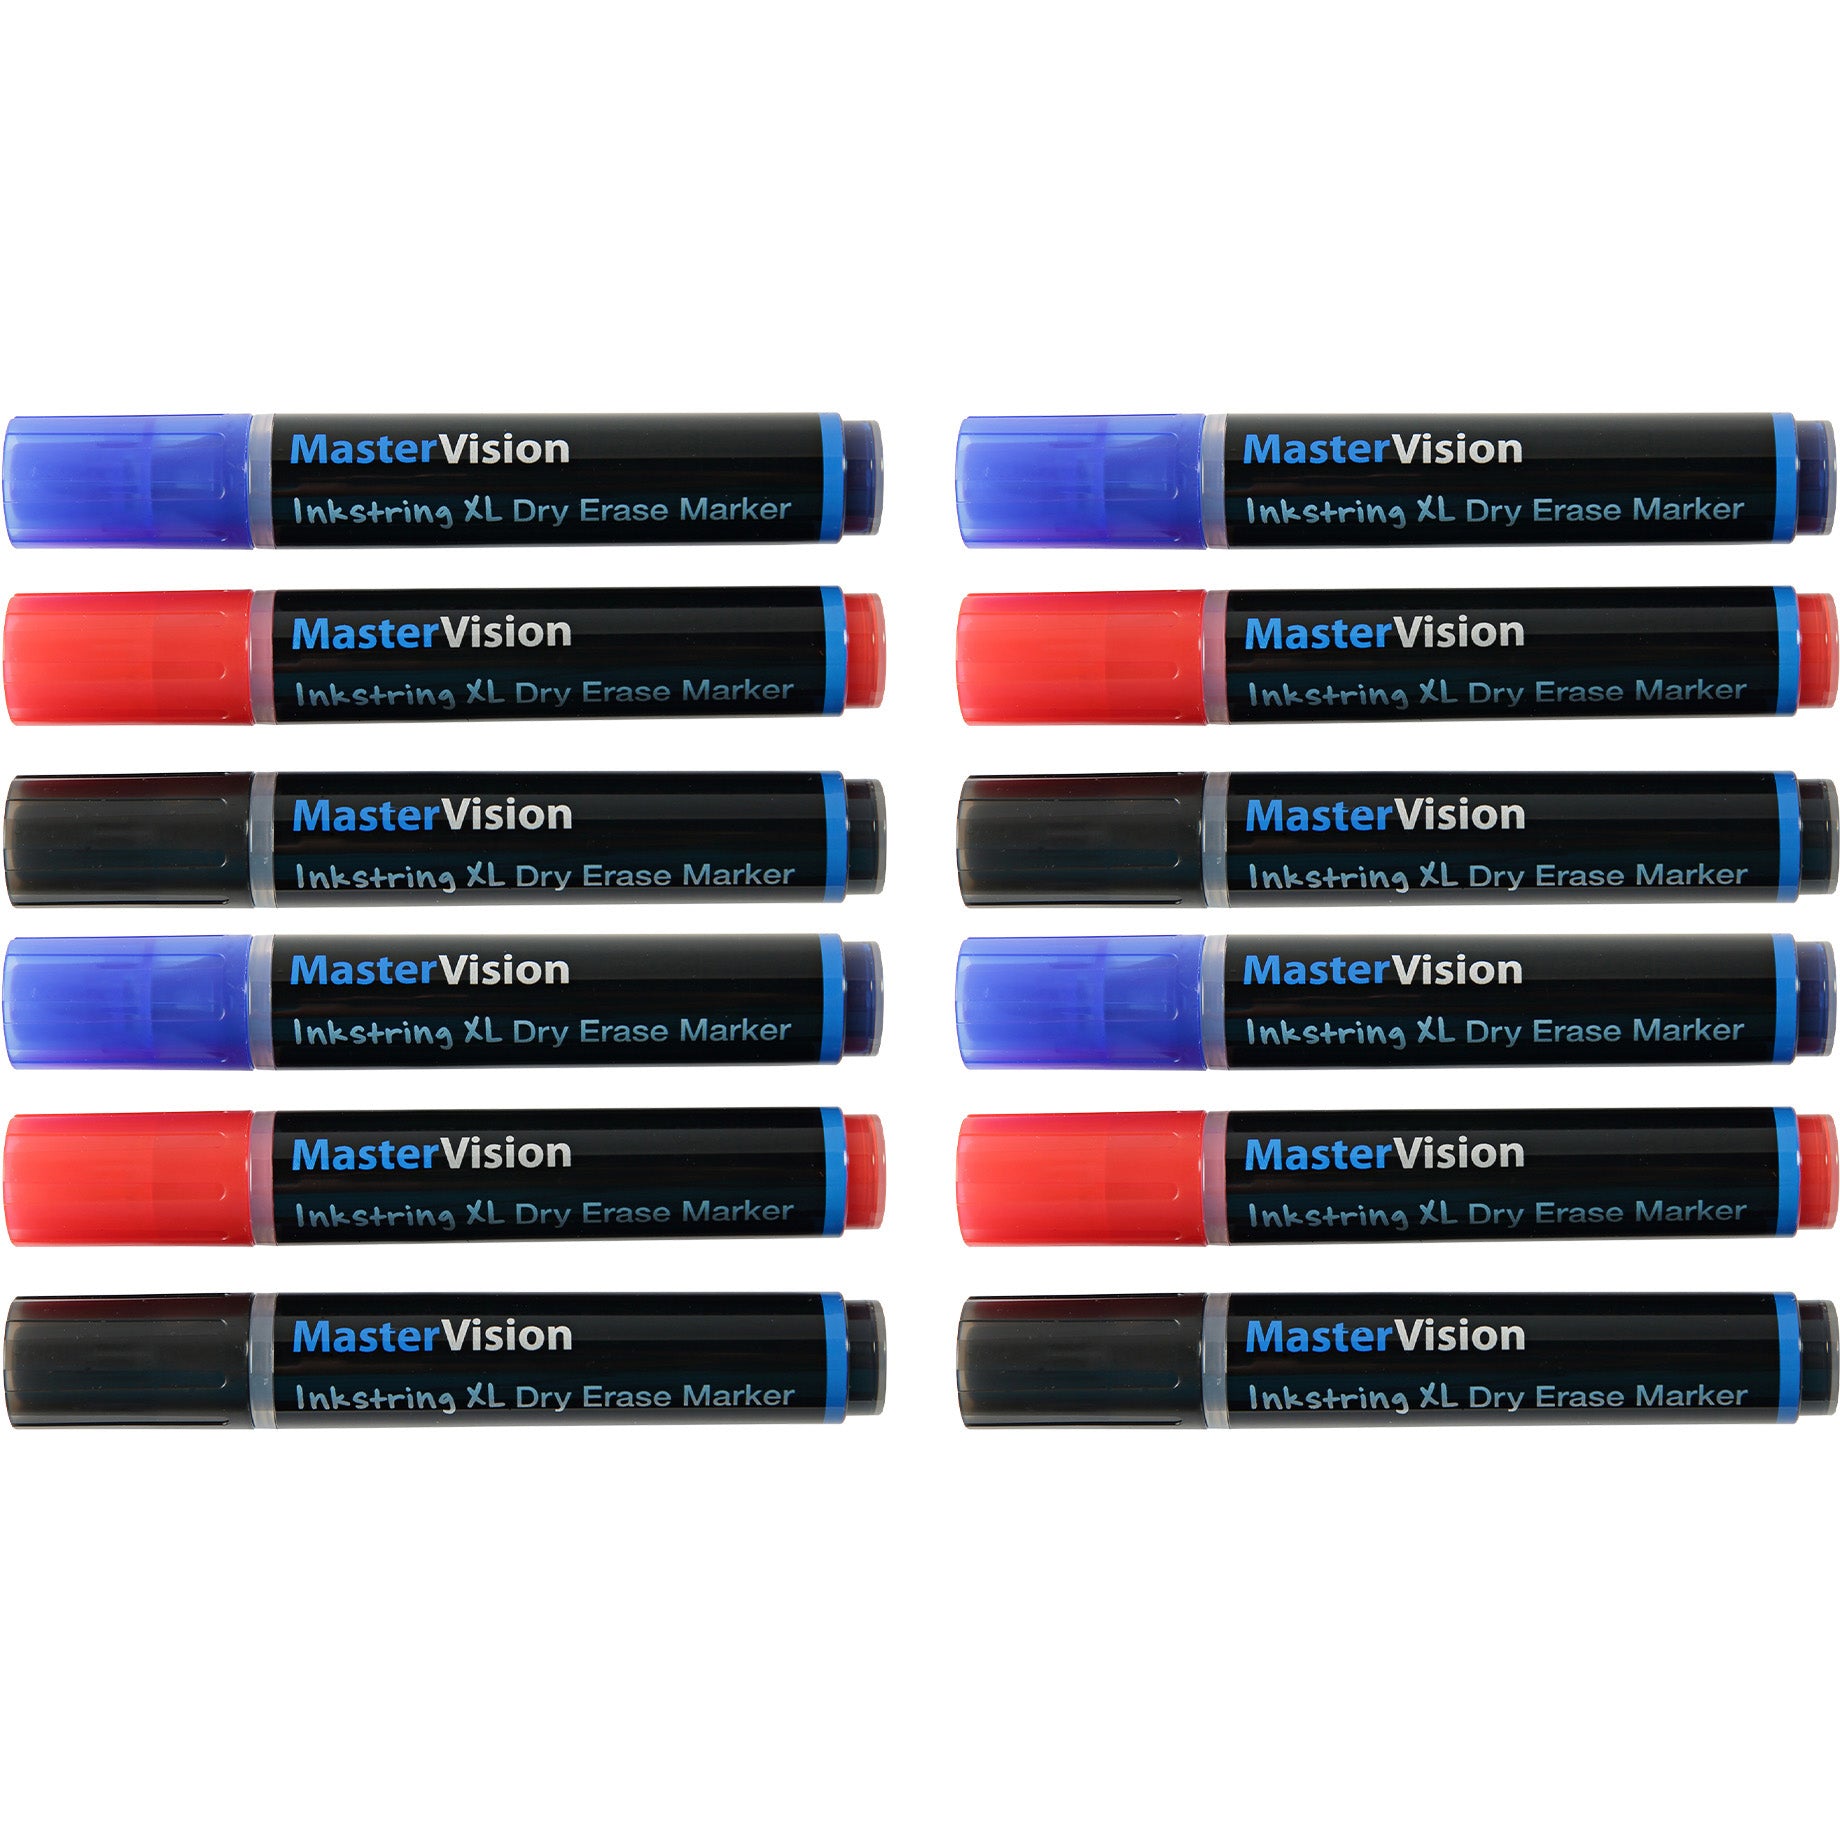 PE4304 Inkstring XL Dry Erase Markers, Assorted Box of 12, Black, Blue, Red, Dust-free Design Prevents Ghosting On Boards, Large Ink Supply, Long Lasting by MasterVision